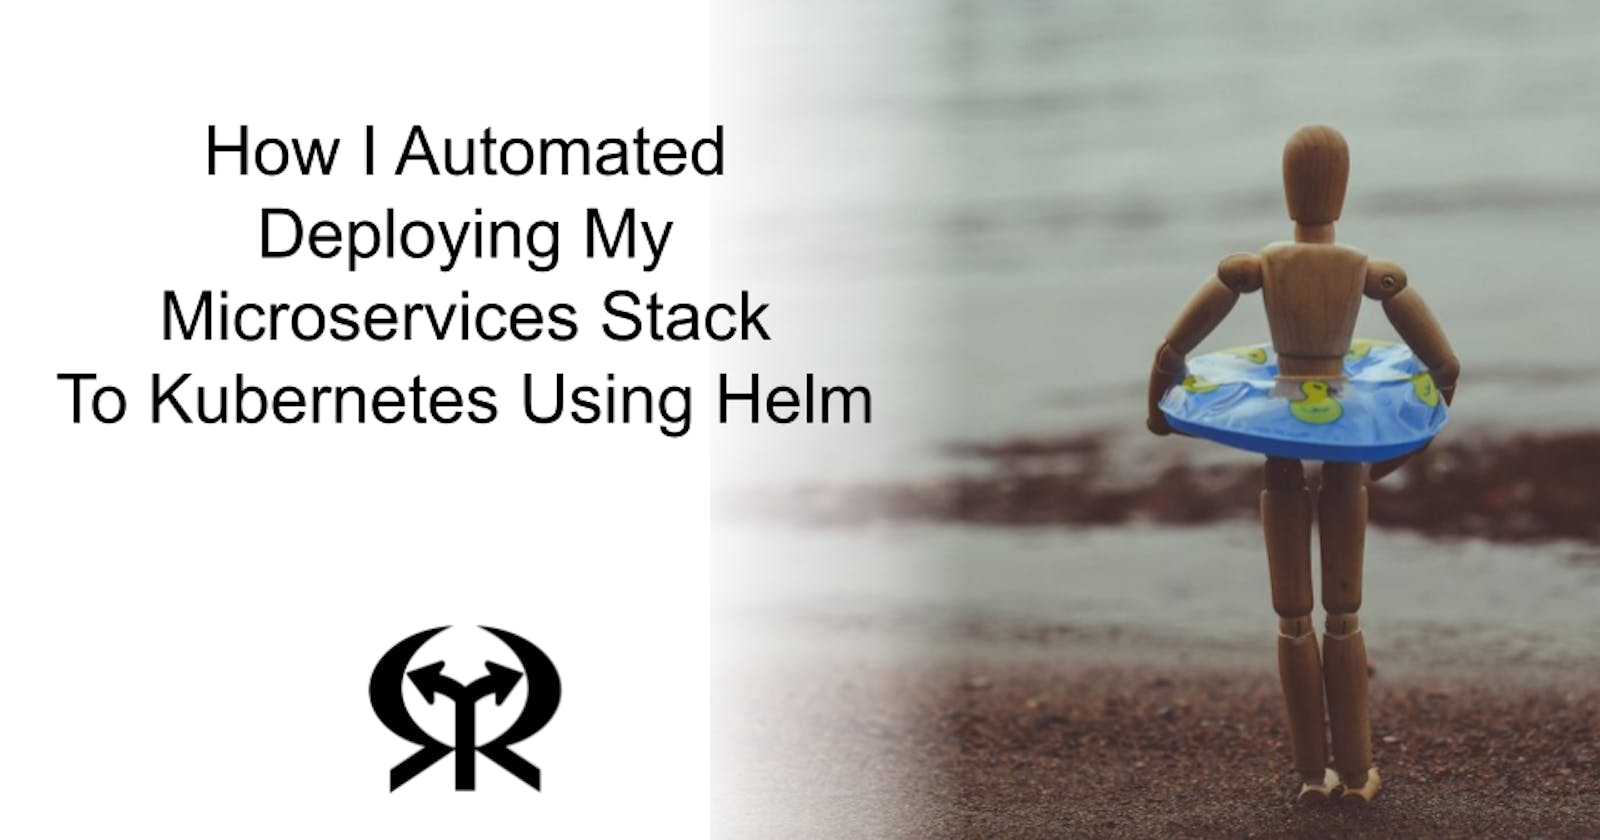 How I Automated Deploying My Microservices Stack To Kubernetes Using Helm